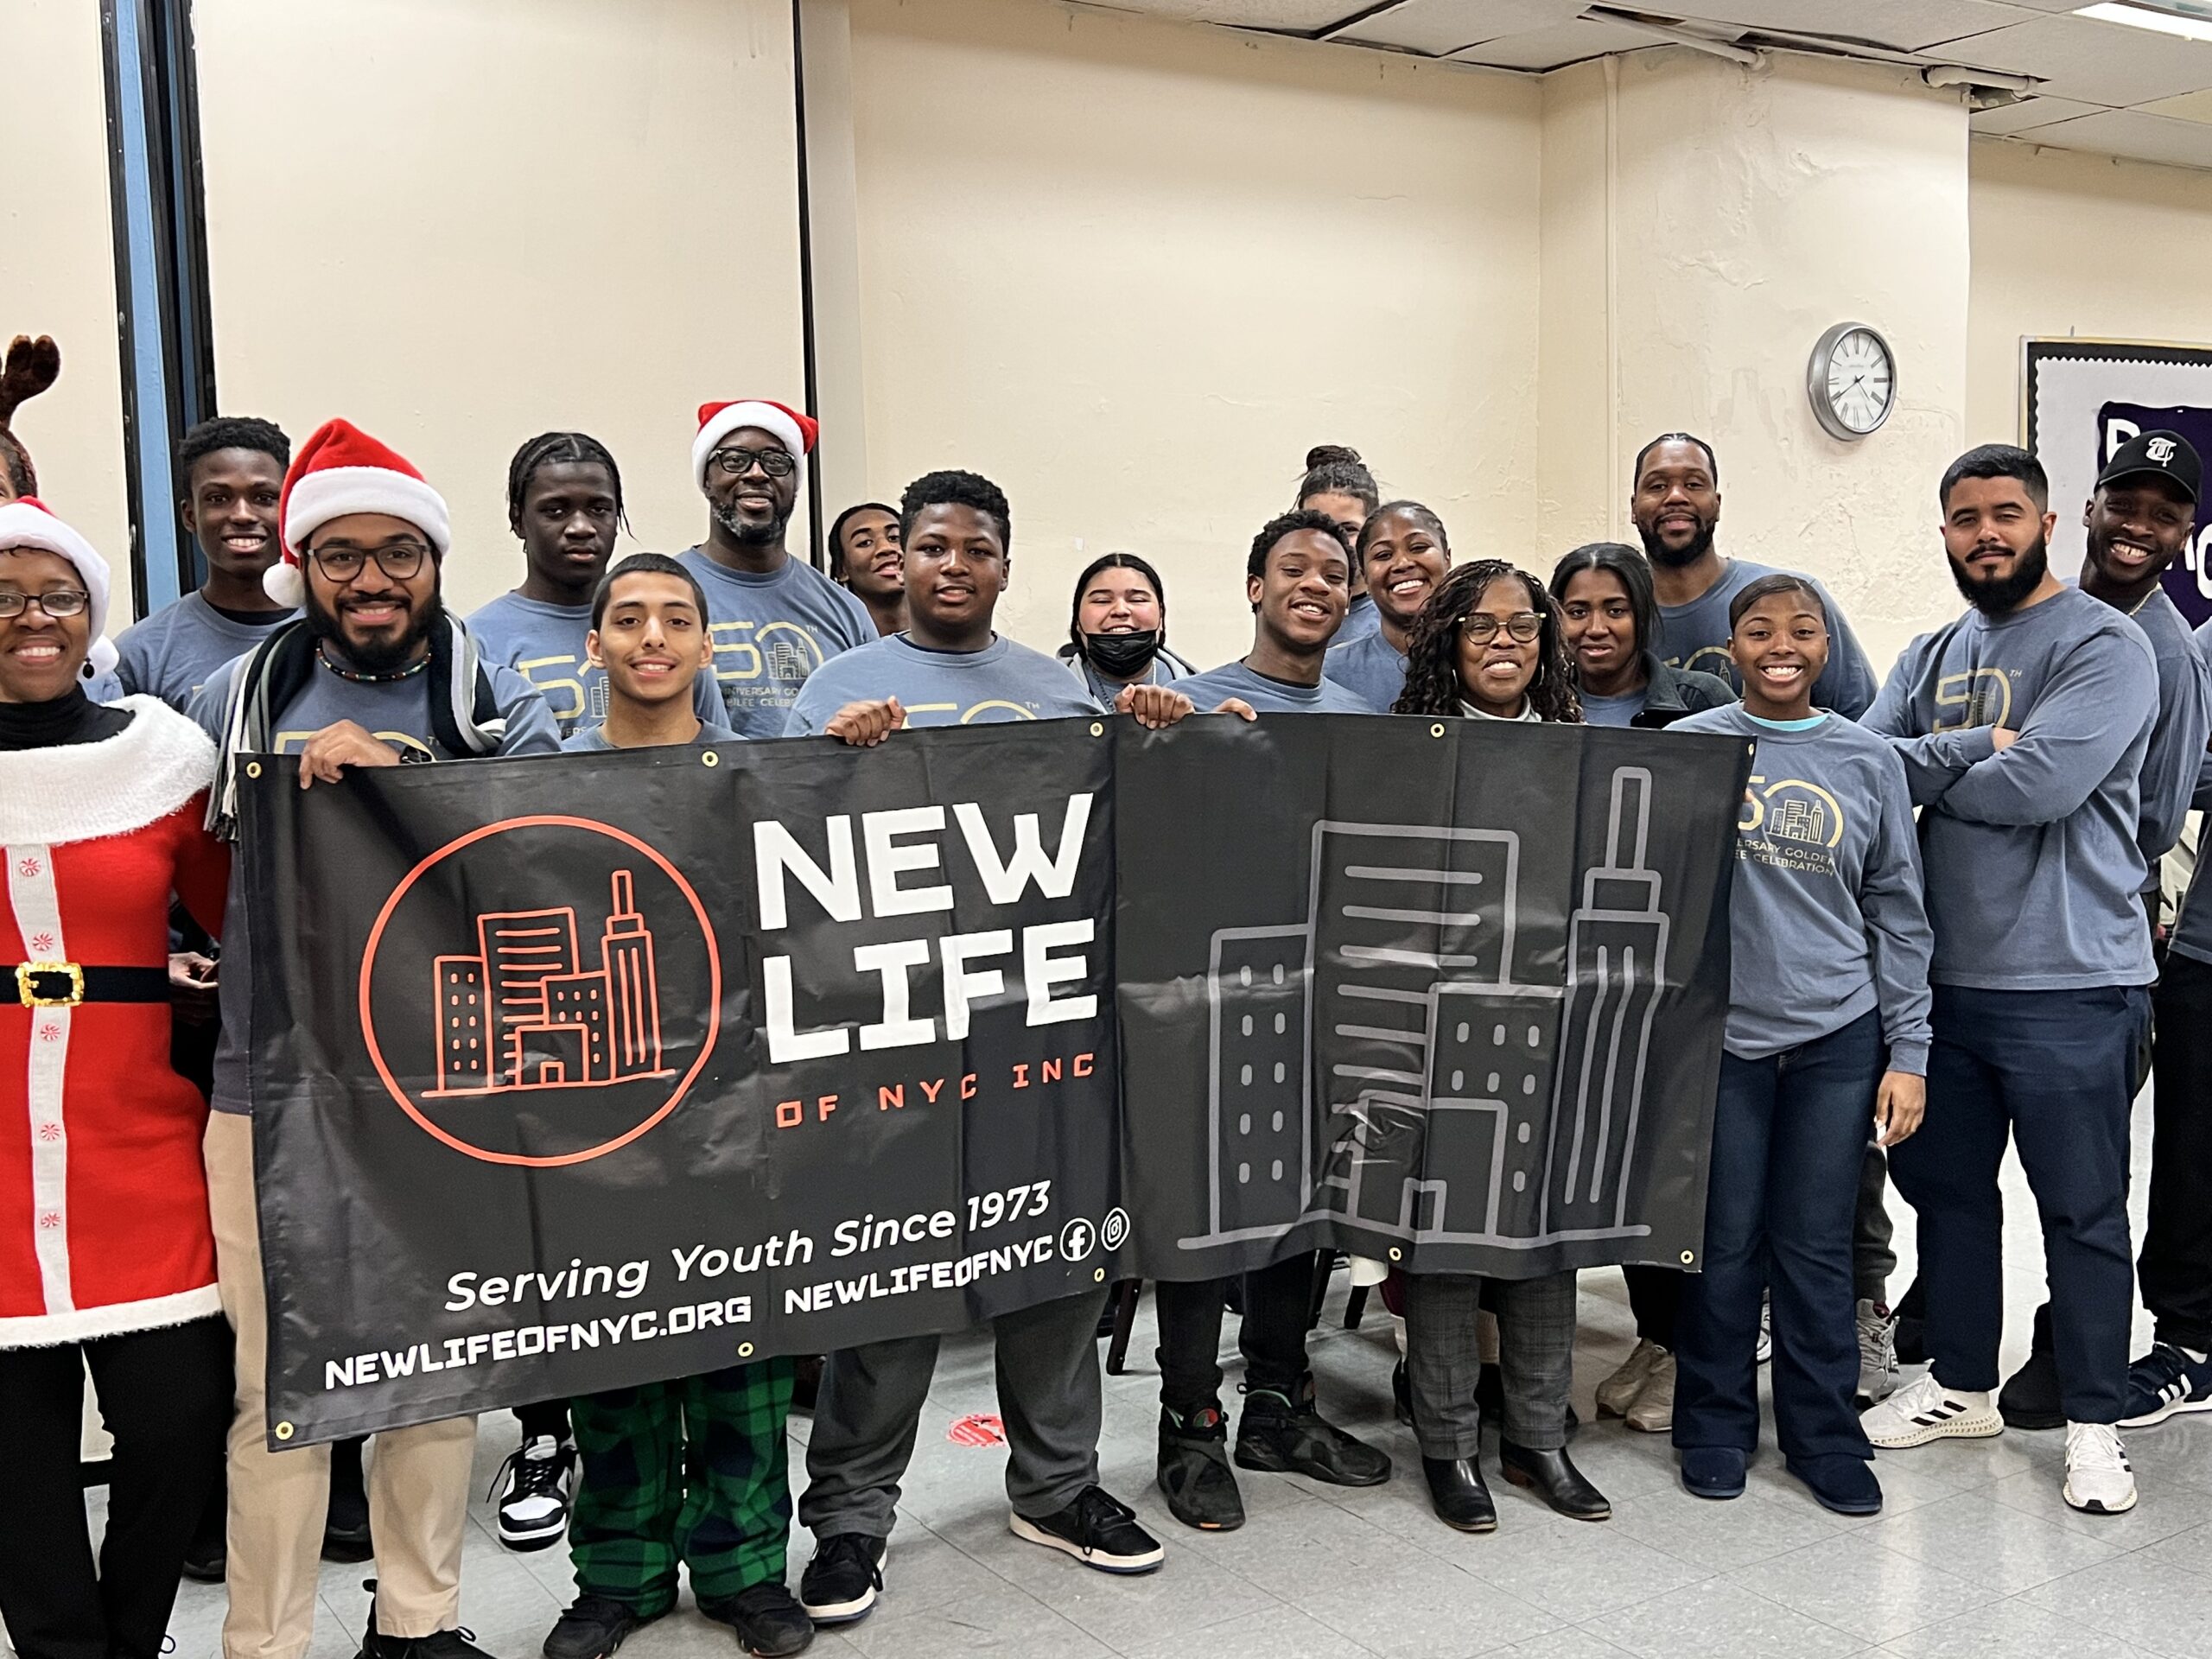 May Member Feature: New Life of NYC